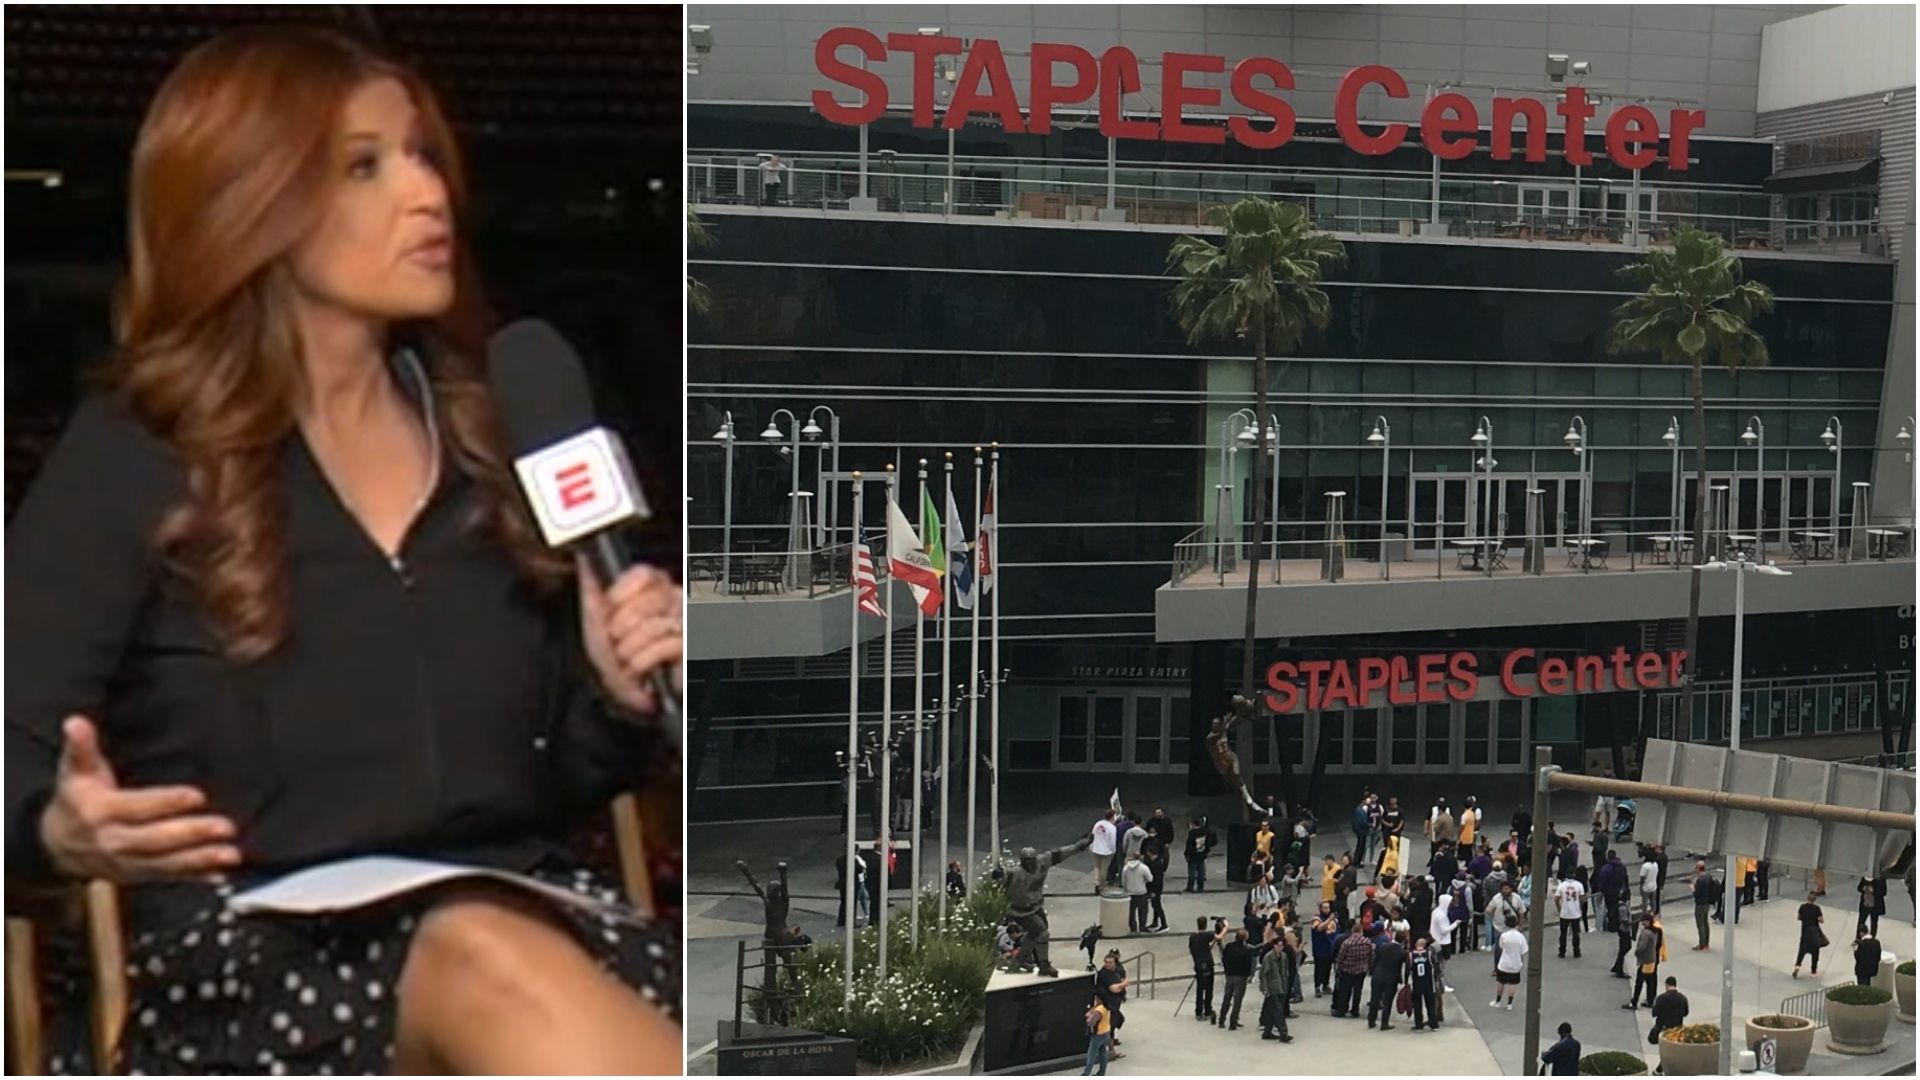 Lakers fans participate in protest at Staples Center - ESPN Video1920 x 1080